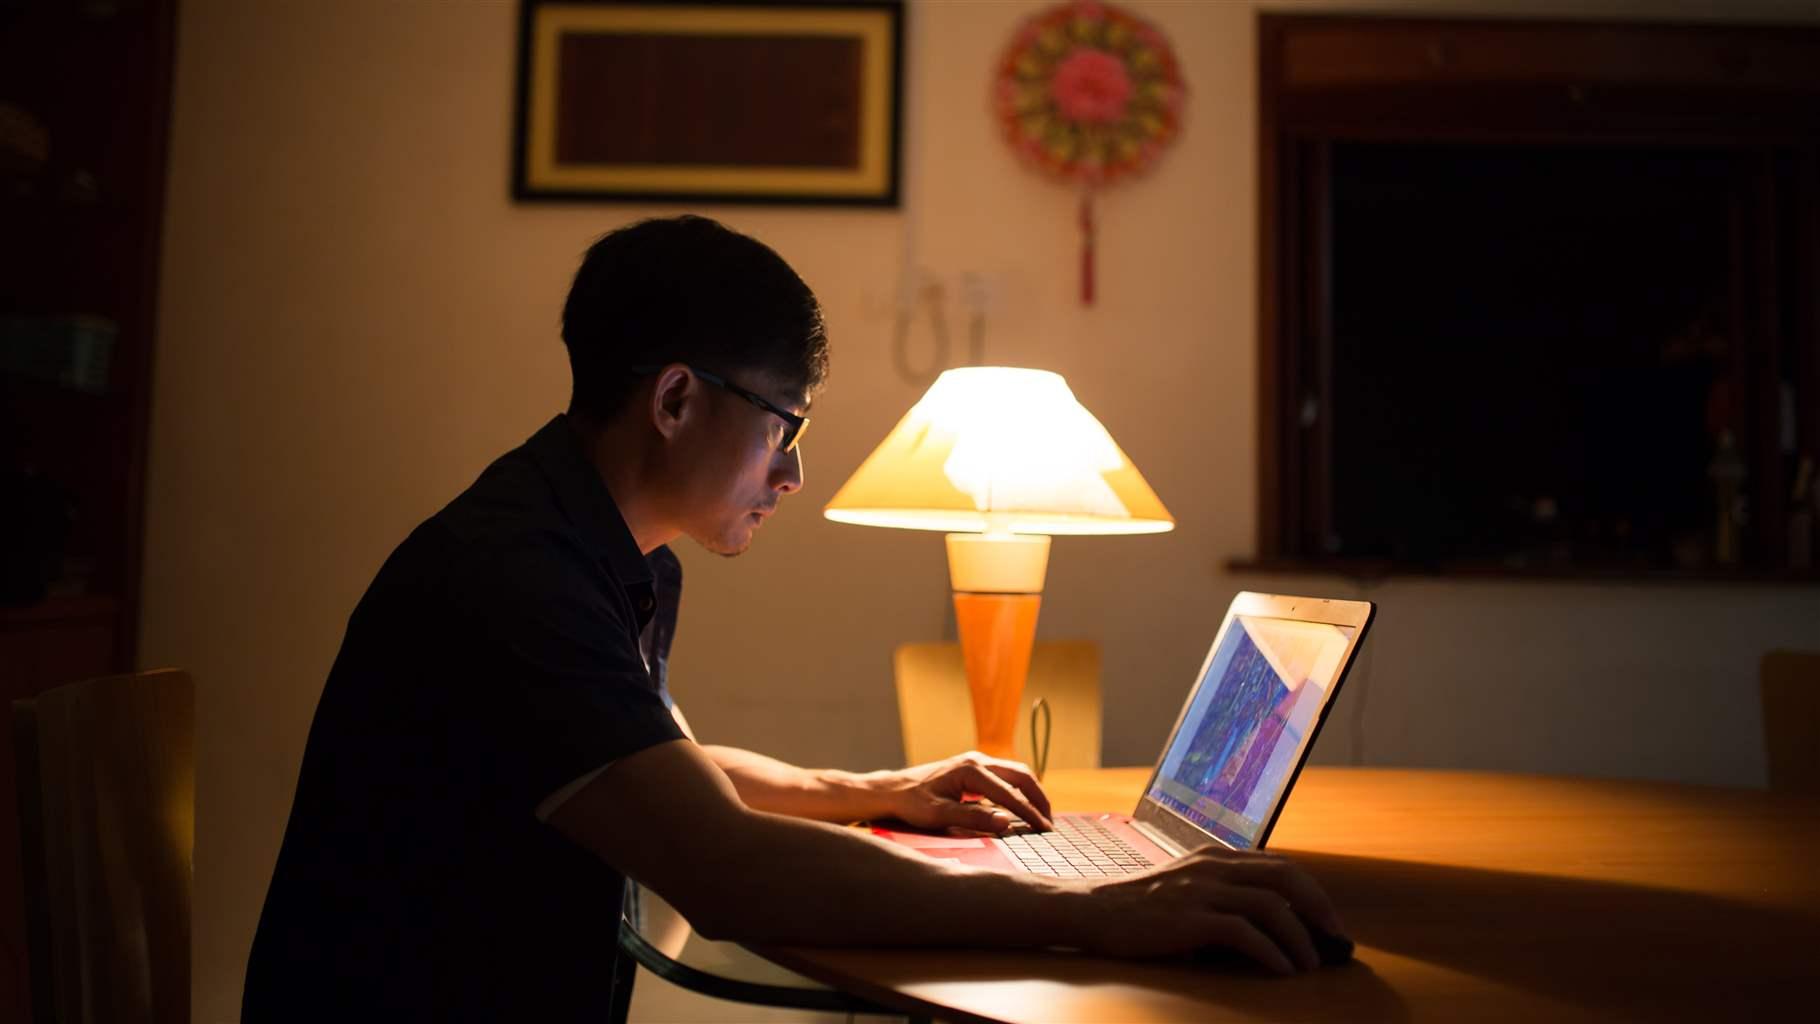 A man sitting at a dinning room table with his laptop and lamp.  